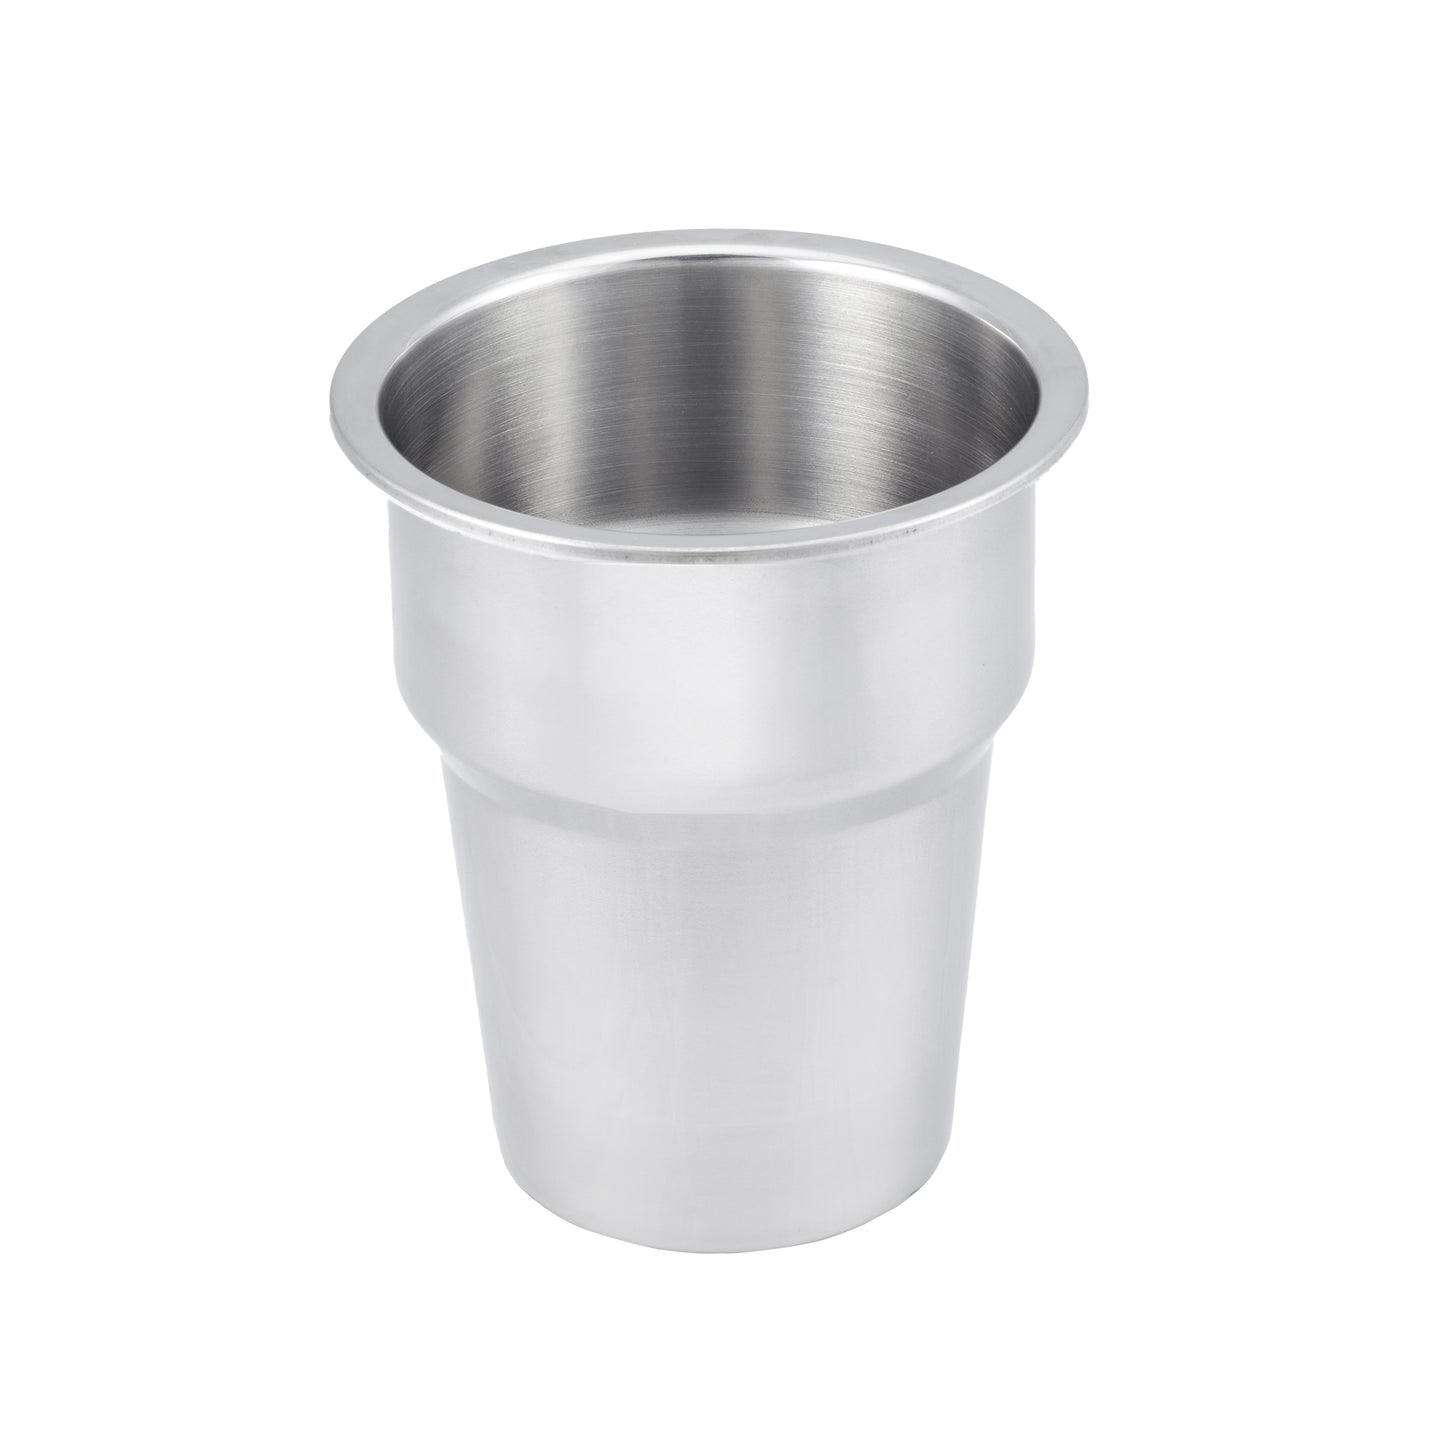 Extra Large Stainless Steel Cupholder